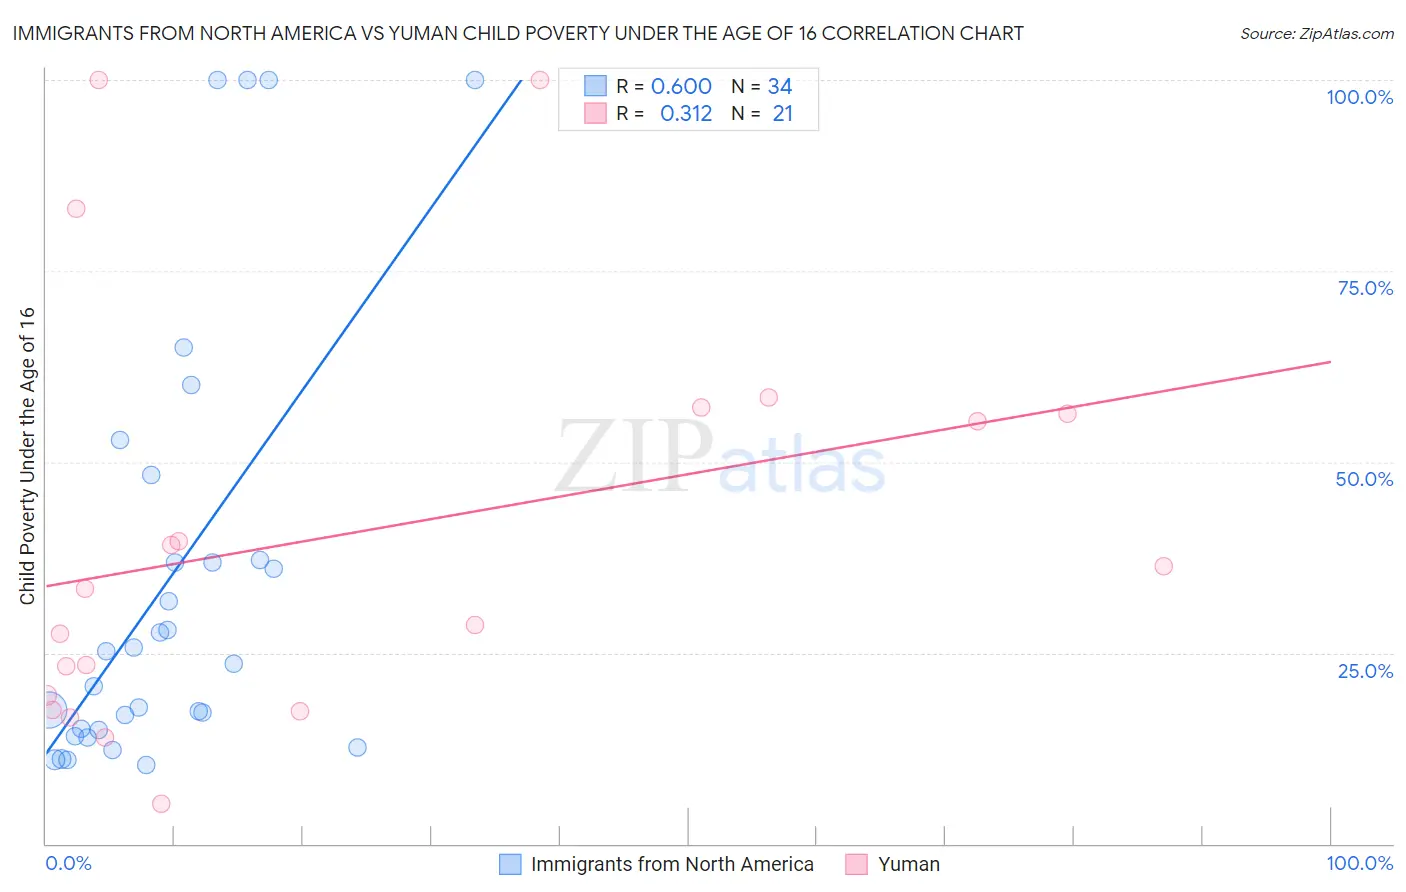 Immigrants from North America vs Yuman Child Poverty Under the Age of 16